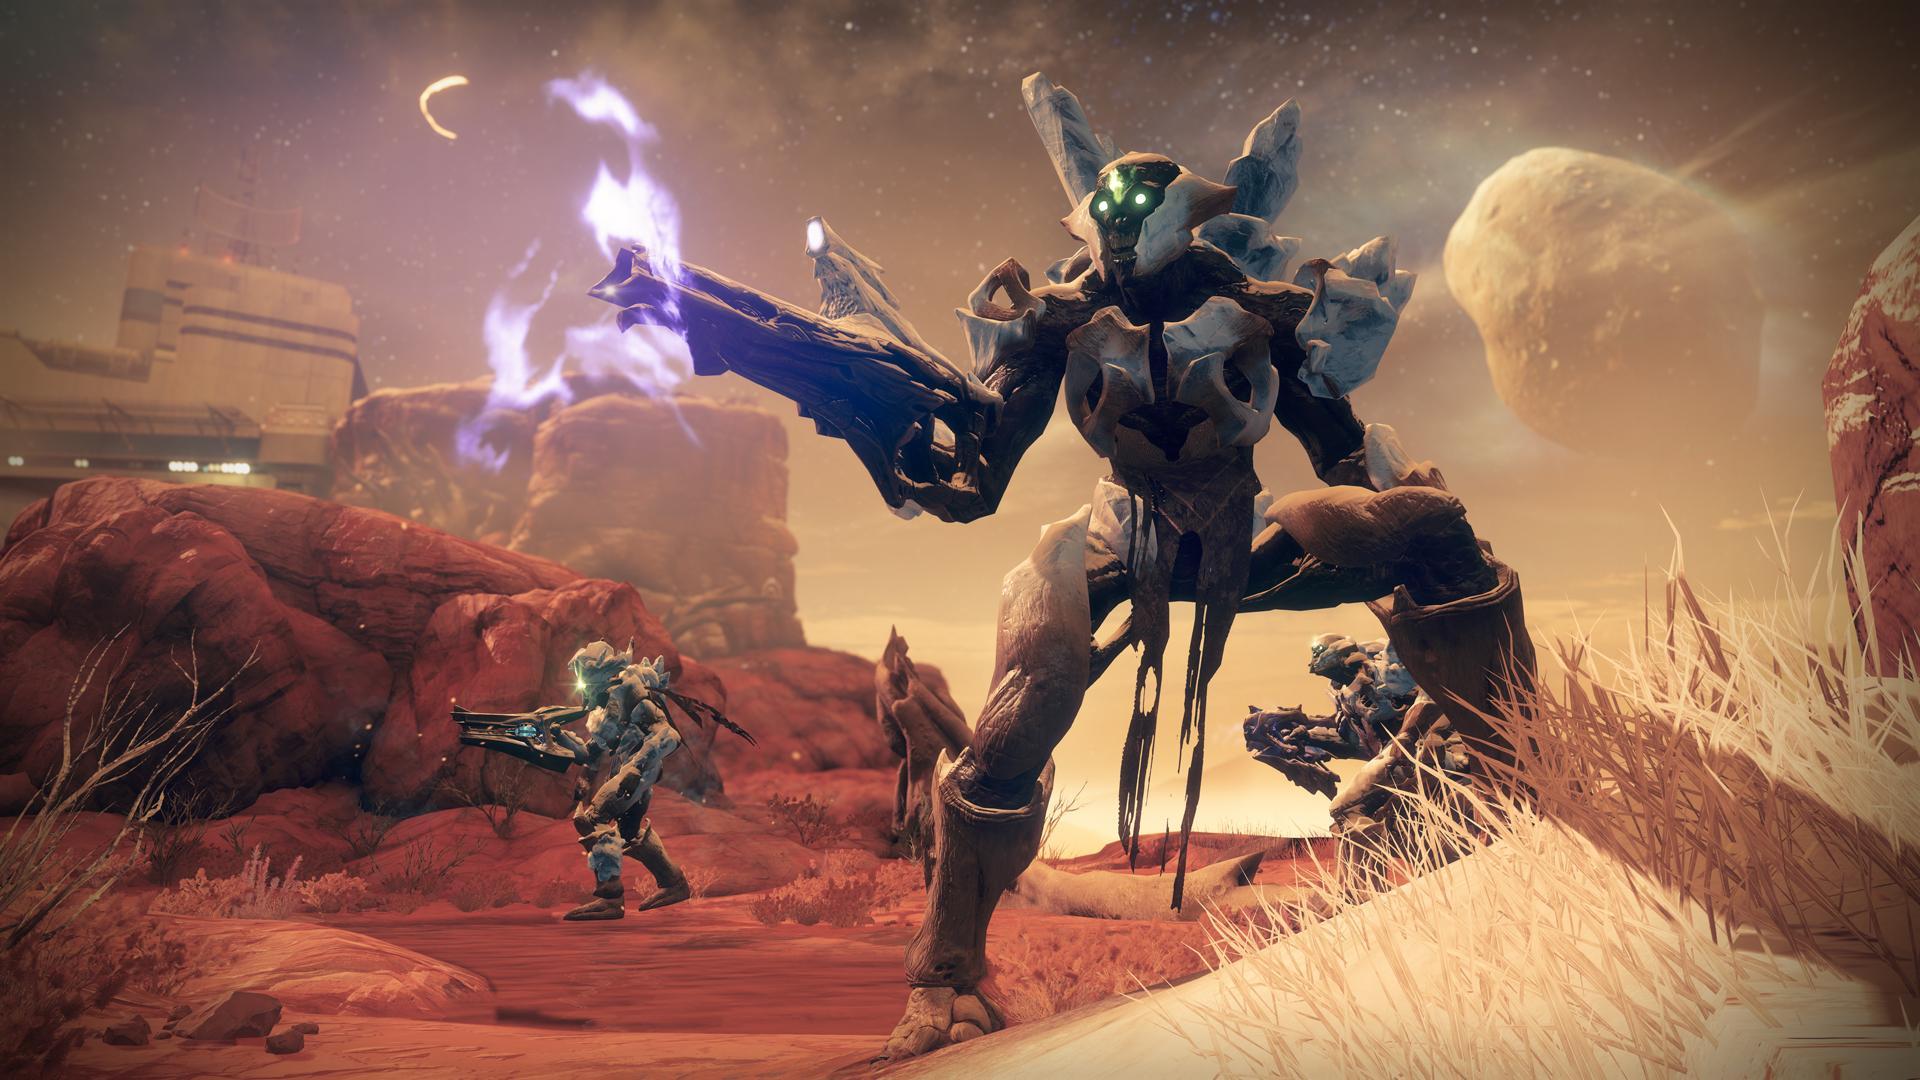 Without New Enemies Or Classes, Destiny 2's Warmind DLC Leaves Much